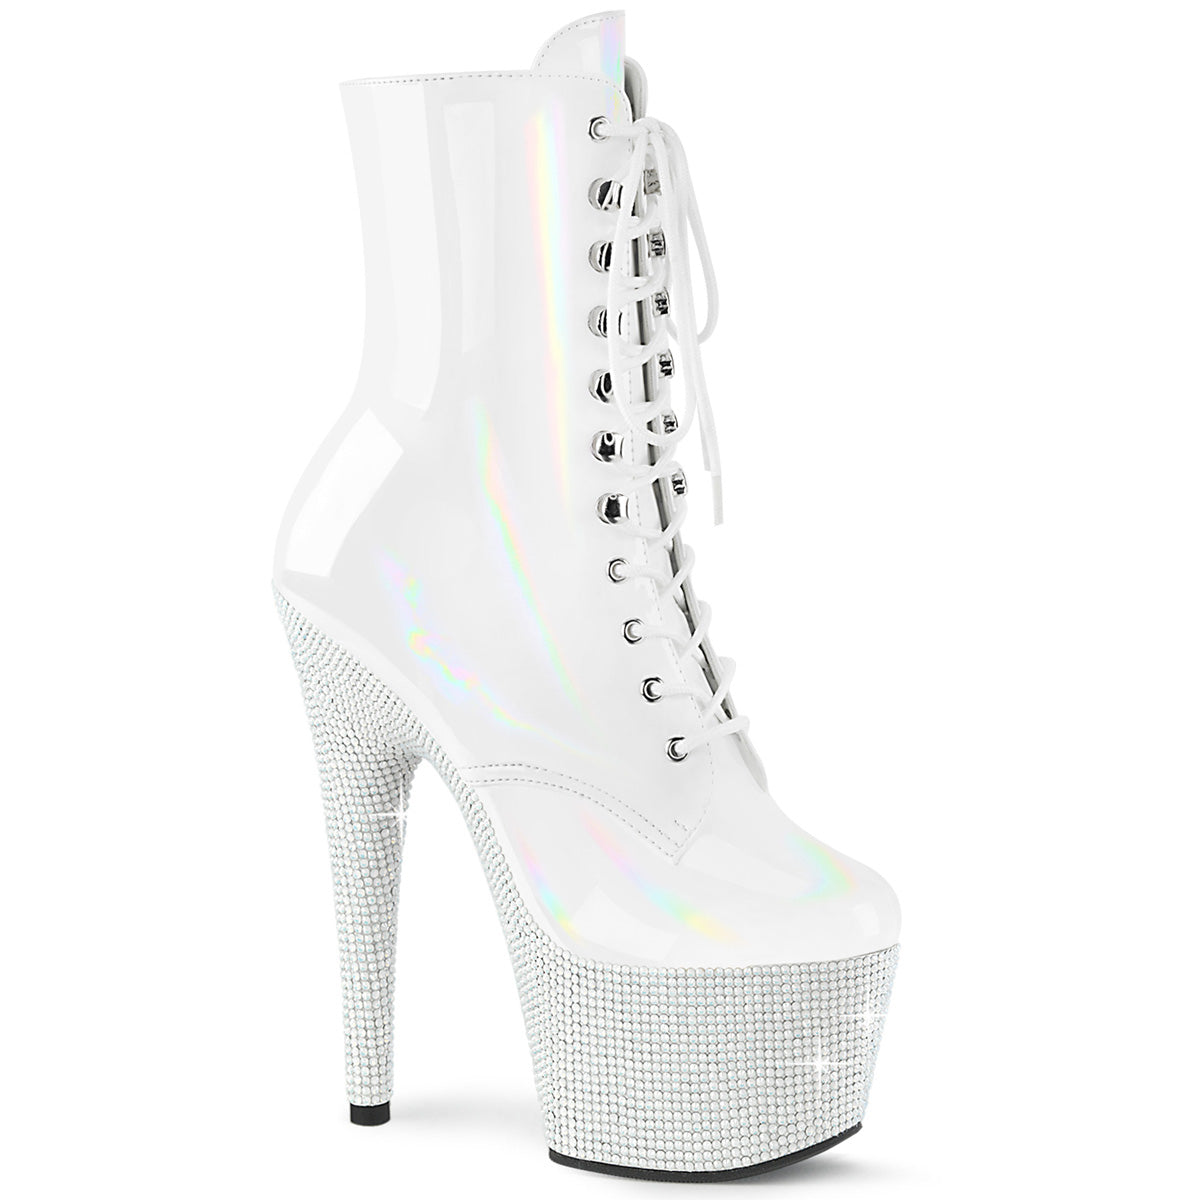 BEJEWELED-1020-7 Strippers Heels Pleaser Platforms (Exotic Dancing) Wht Holo Pat/Wht RS